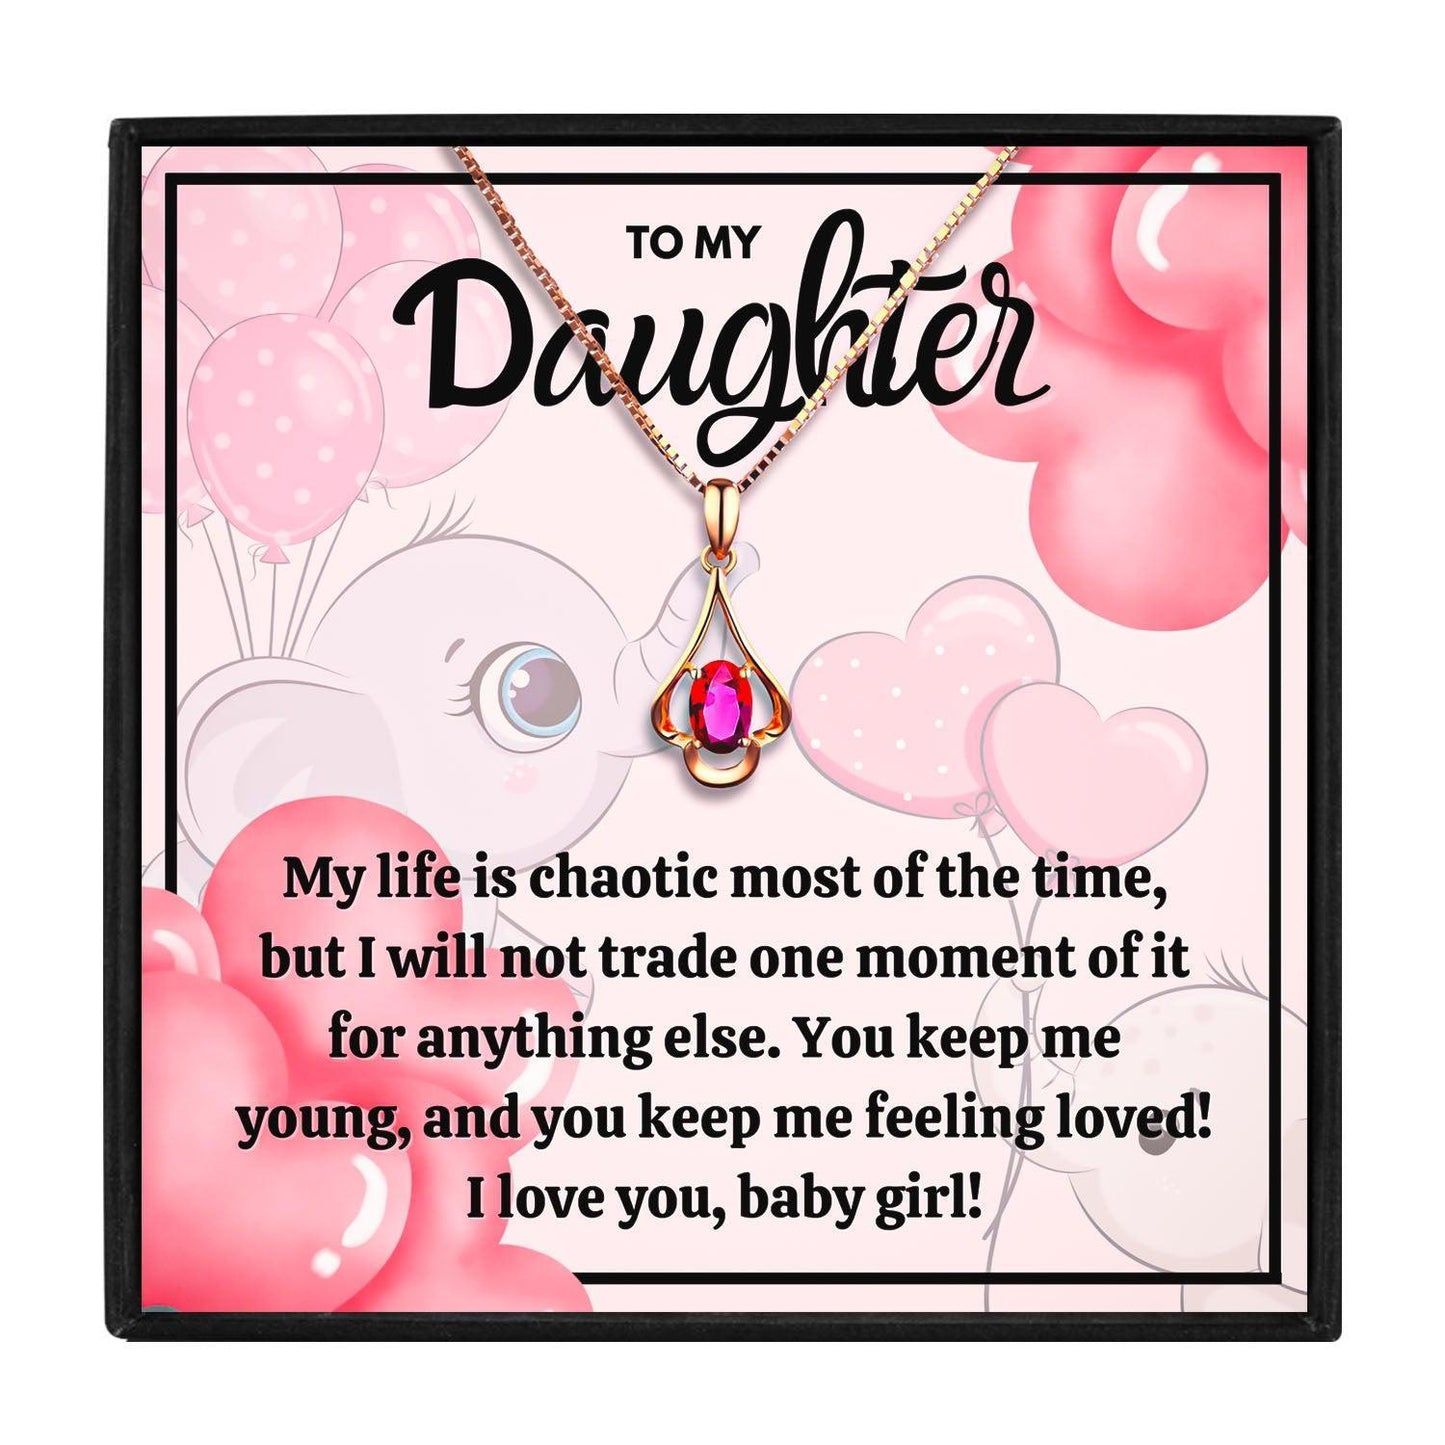 To My Daughter Love Mom Necklace Gift Set for Christmas 2023 | To My Daughter Love Mom Necklace Gift Set - undefined | Mother Daughter, Mother Daughter Gift Necklace, Mother Daughter Infinity Necklace, Mother Daughter Interlocking Circle Necklace Gift Set, Mother Daughter Necklace, Mother Daughter Wedding Gift | From Hunny Life | hunnylife.com